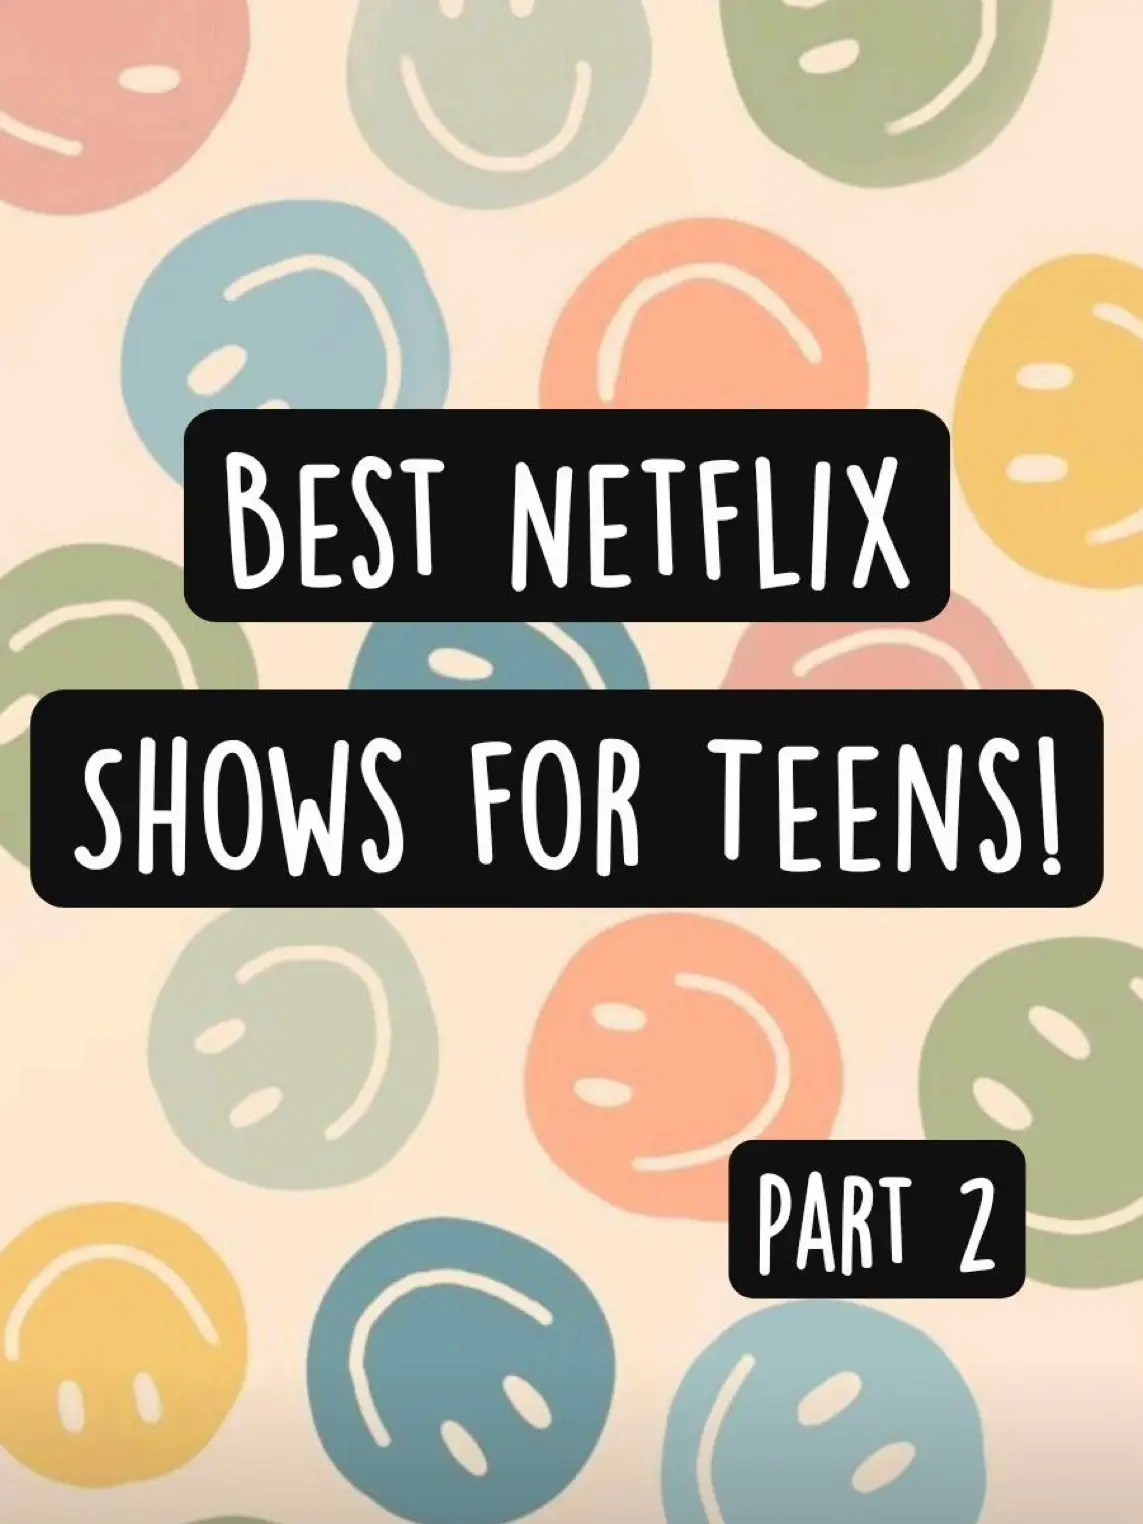 Good Netflix Shows to Watch with Your Boyfriend - Lemon8 Search